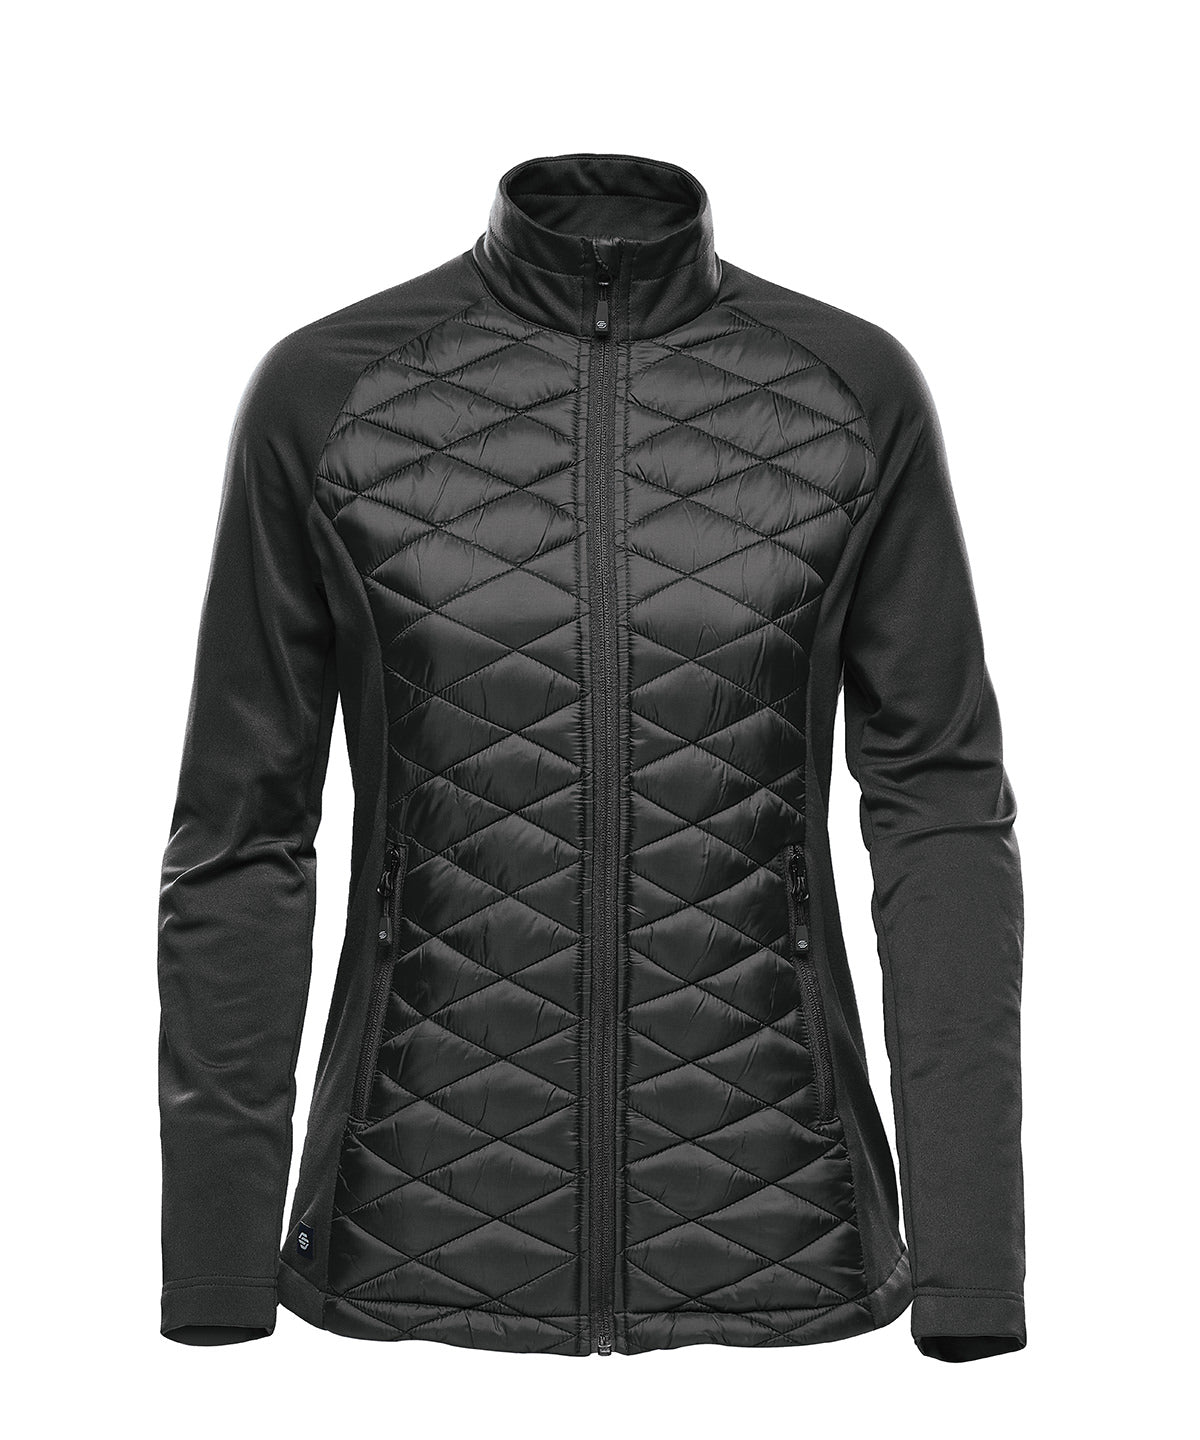 Women’s Boulder thermal shell